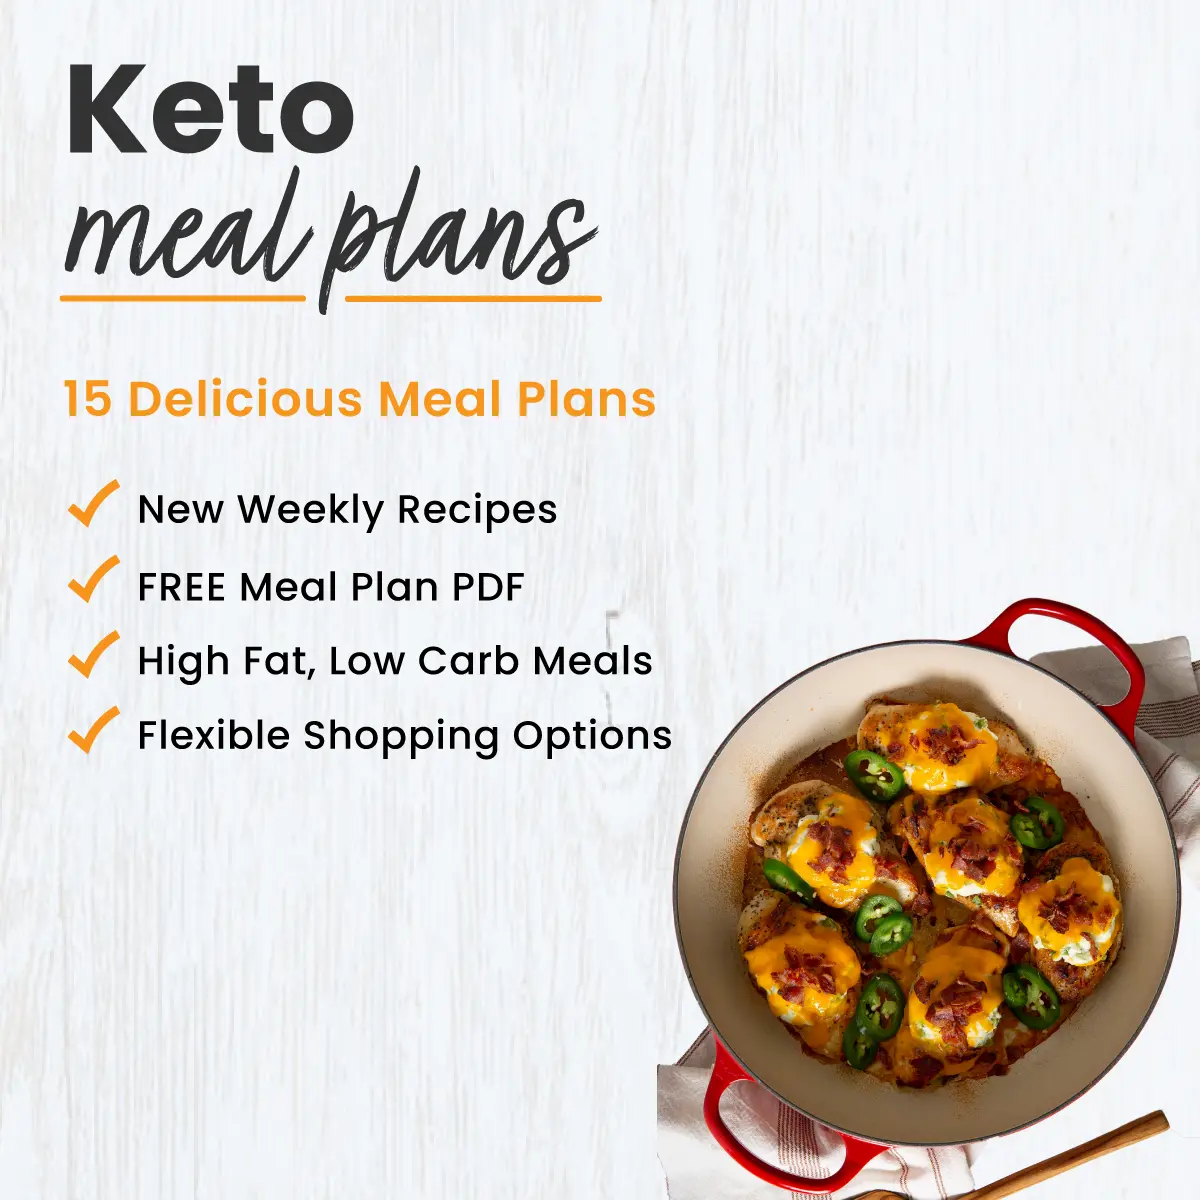 15 Low-Carb Meal Plans for Anyone Following the Keto Diet